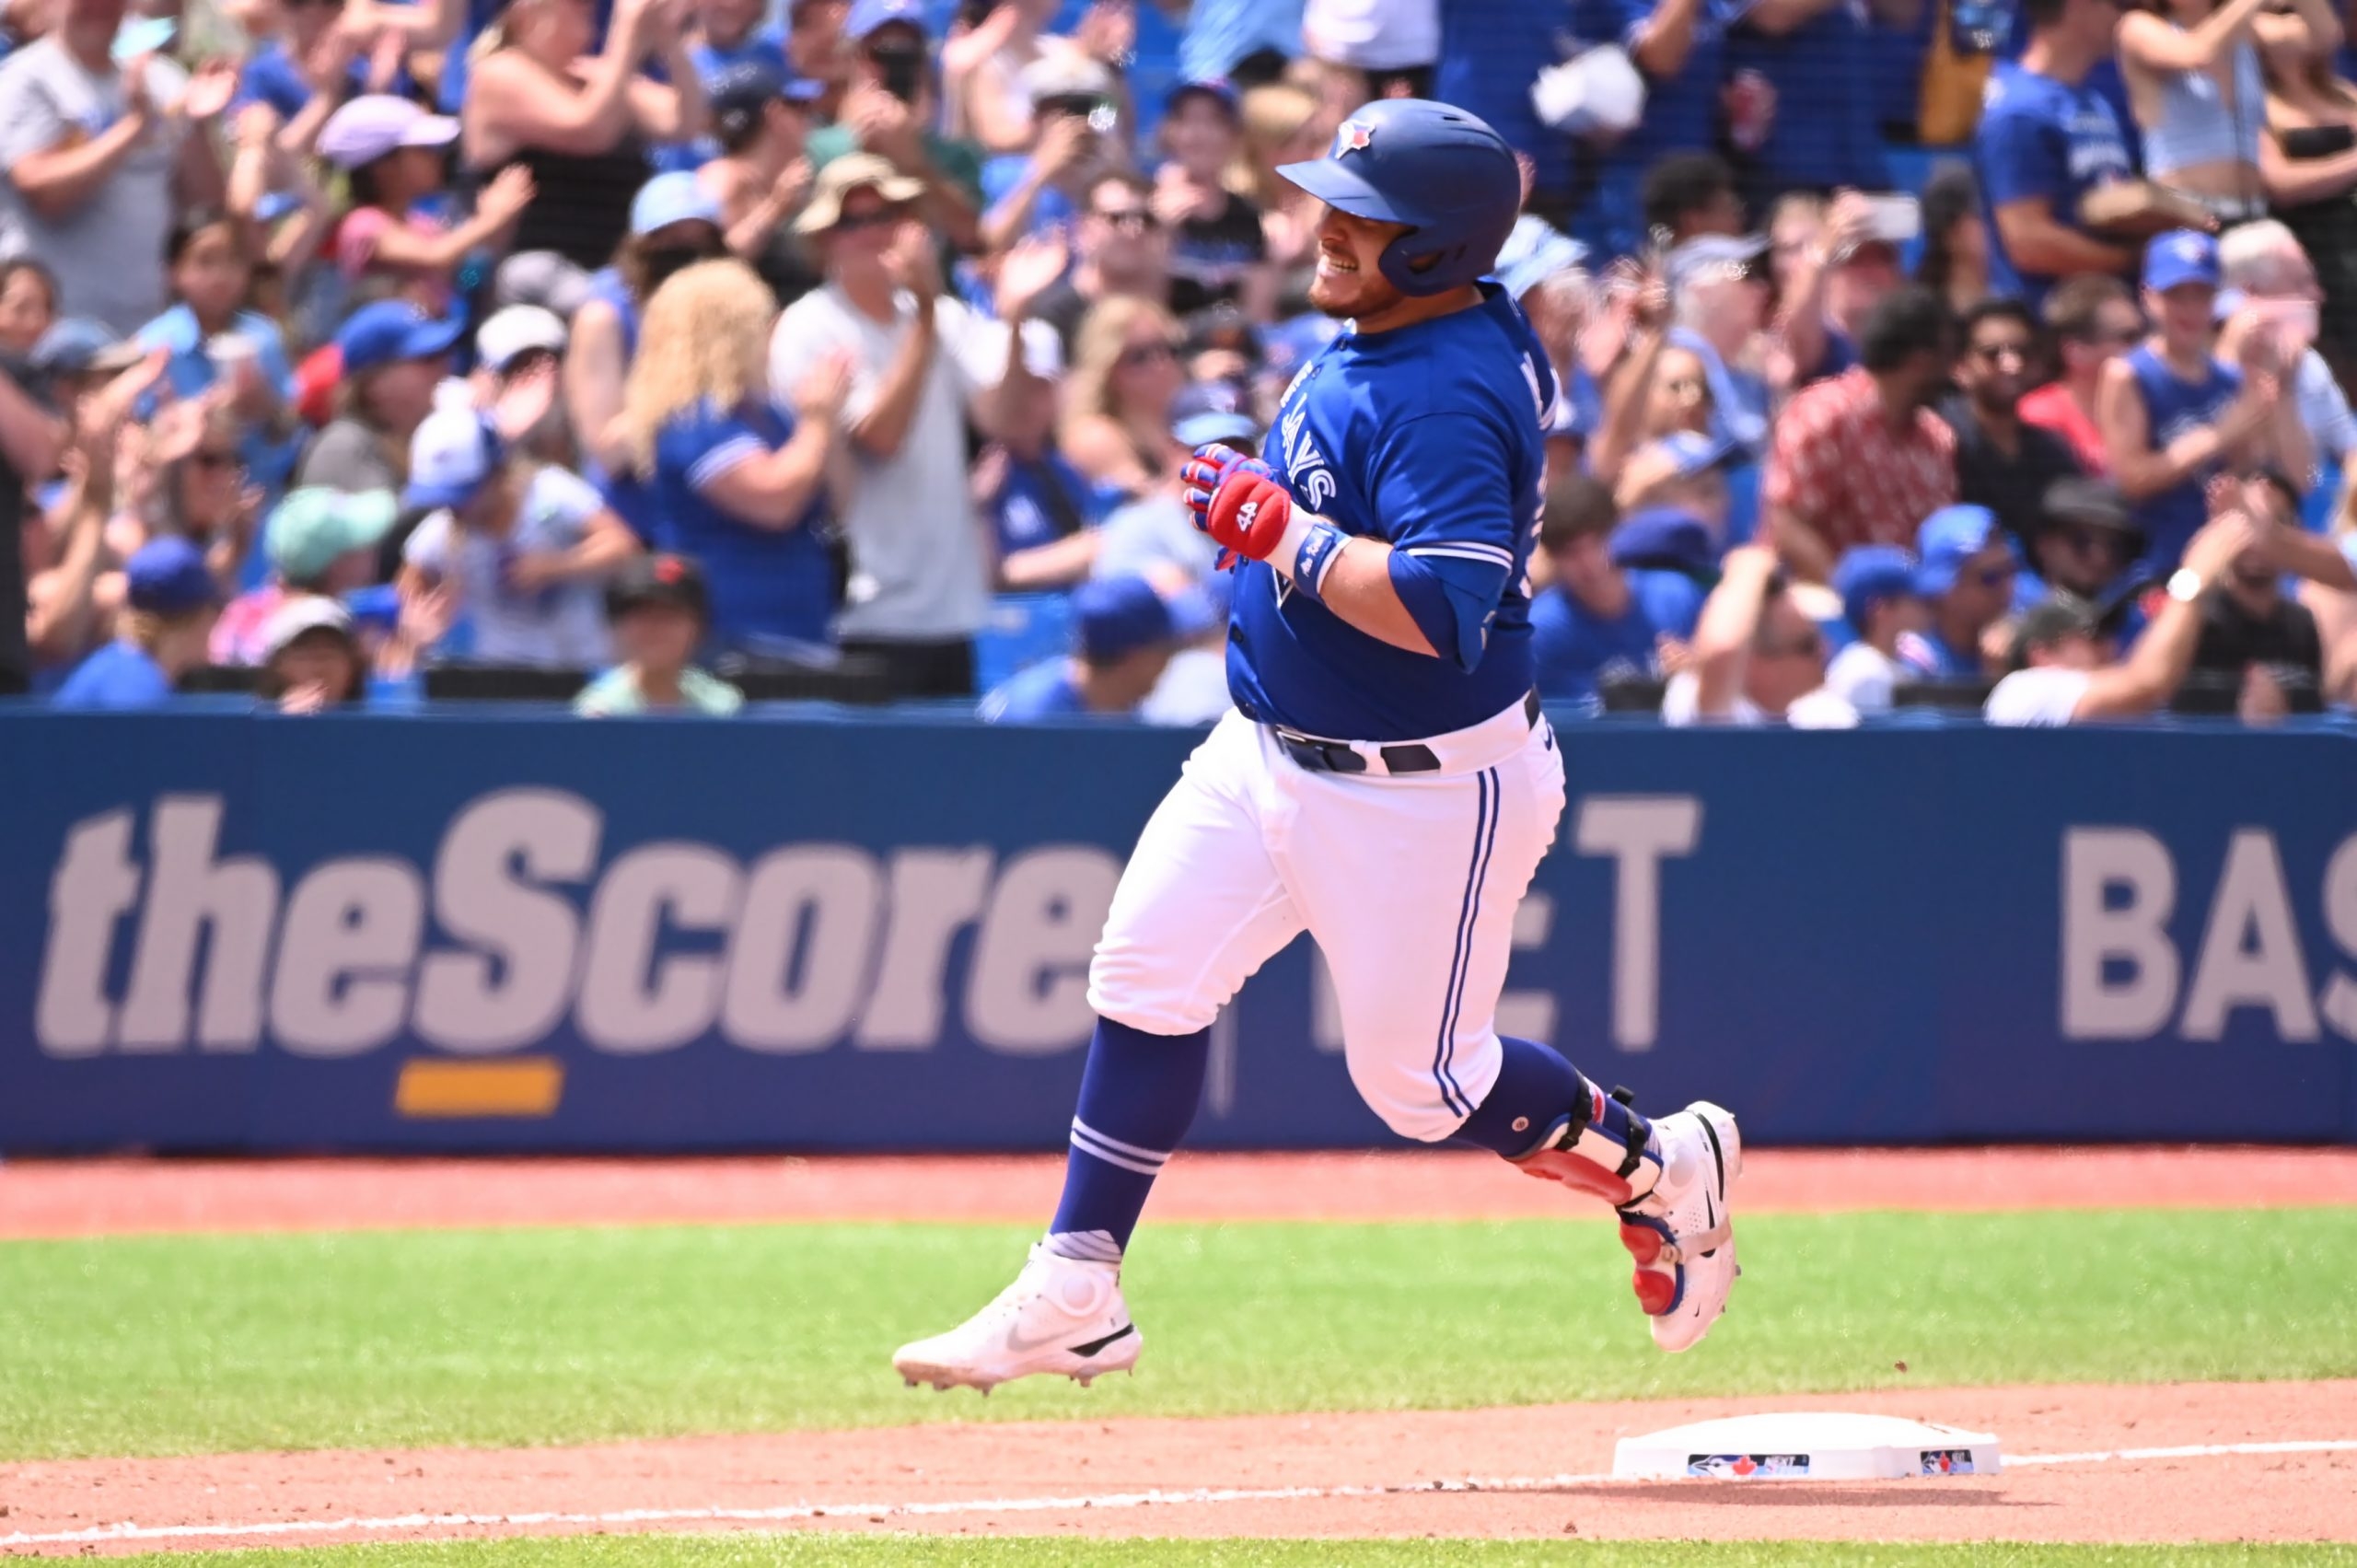 THE OUTLIER ALL-STAR: How the Blue Jays landed a gem in Alejandro